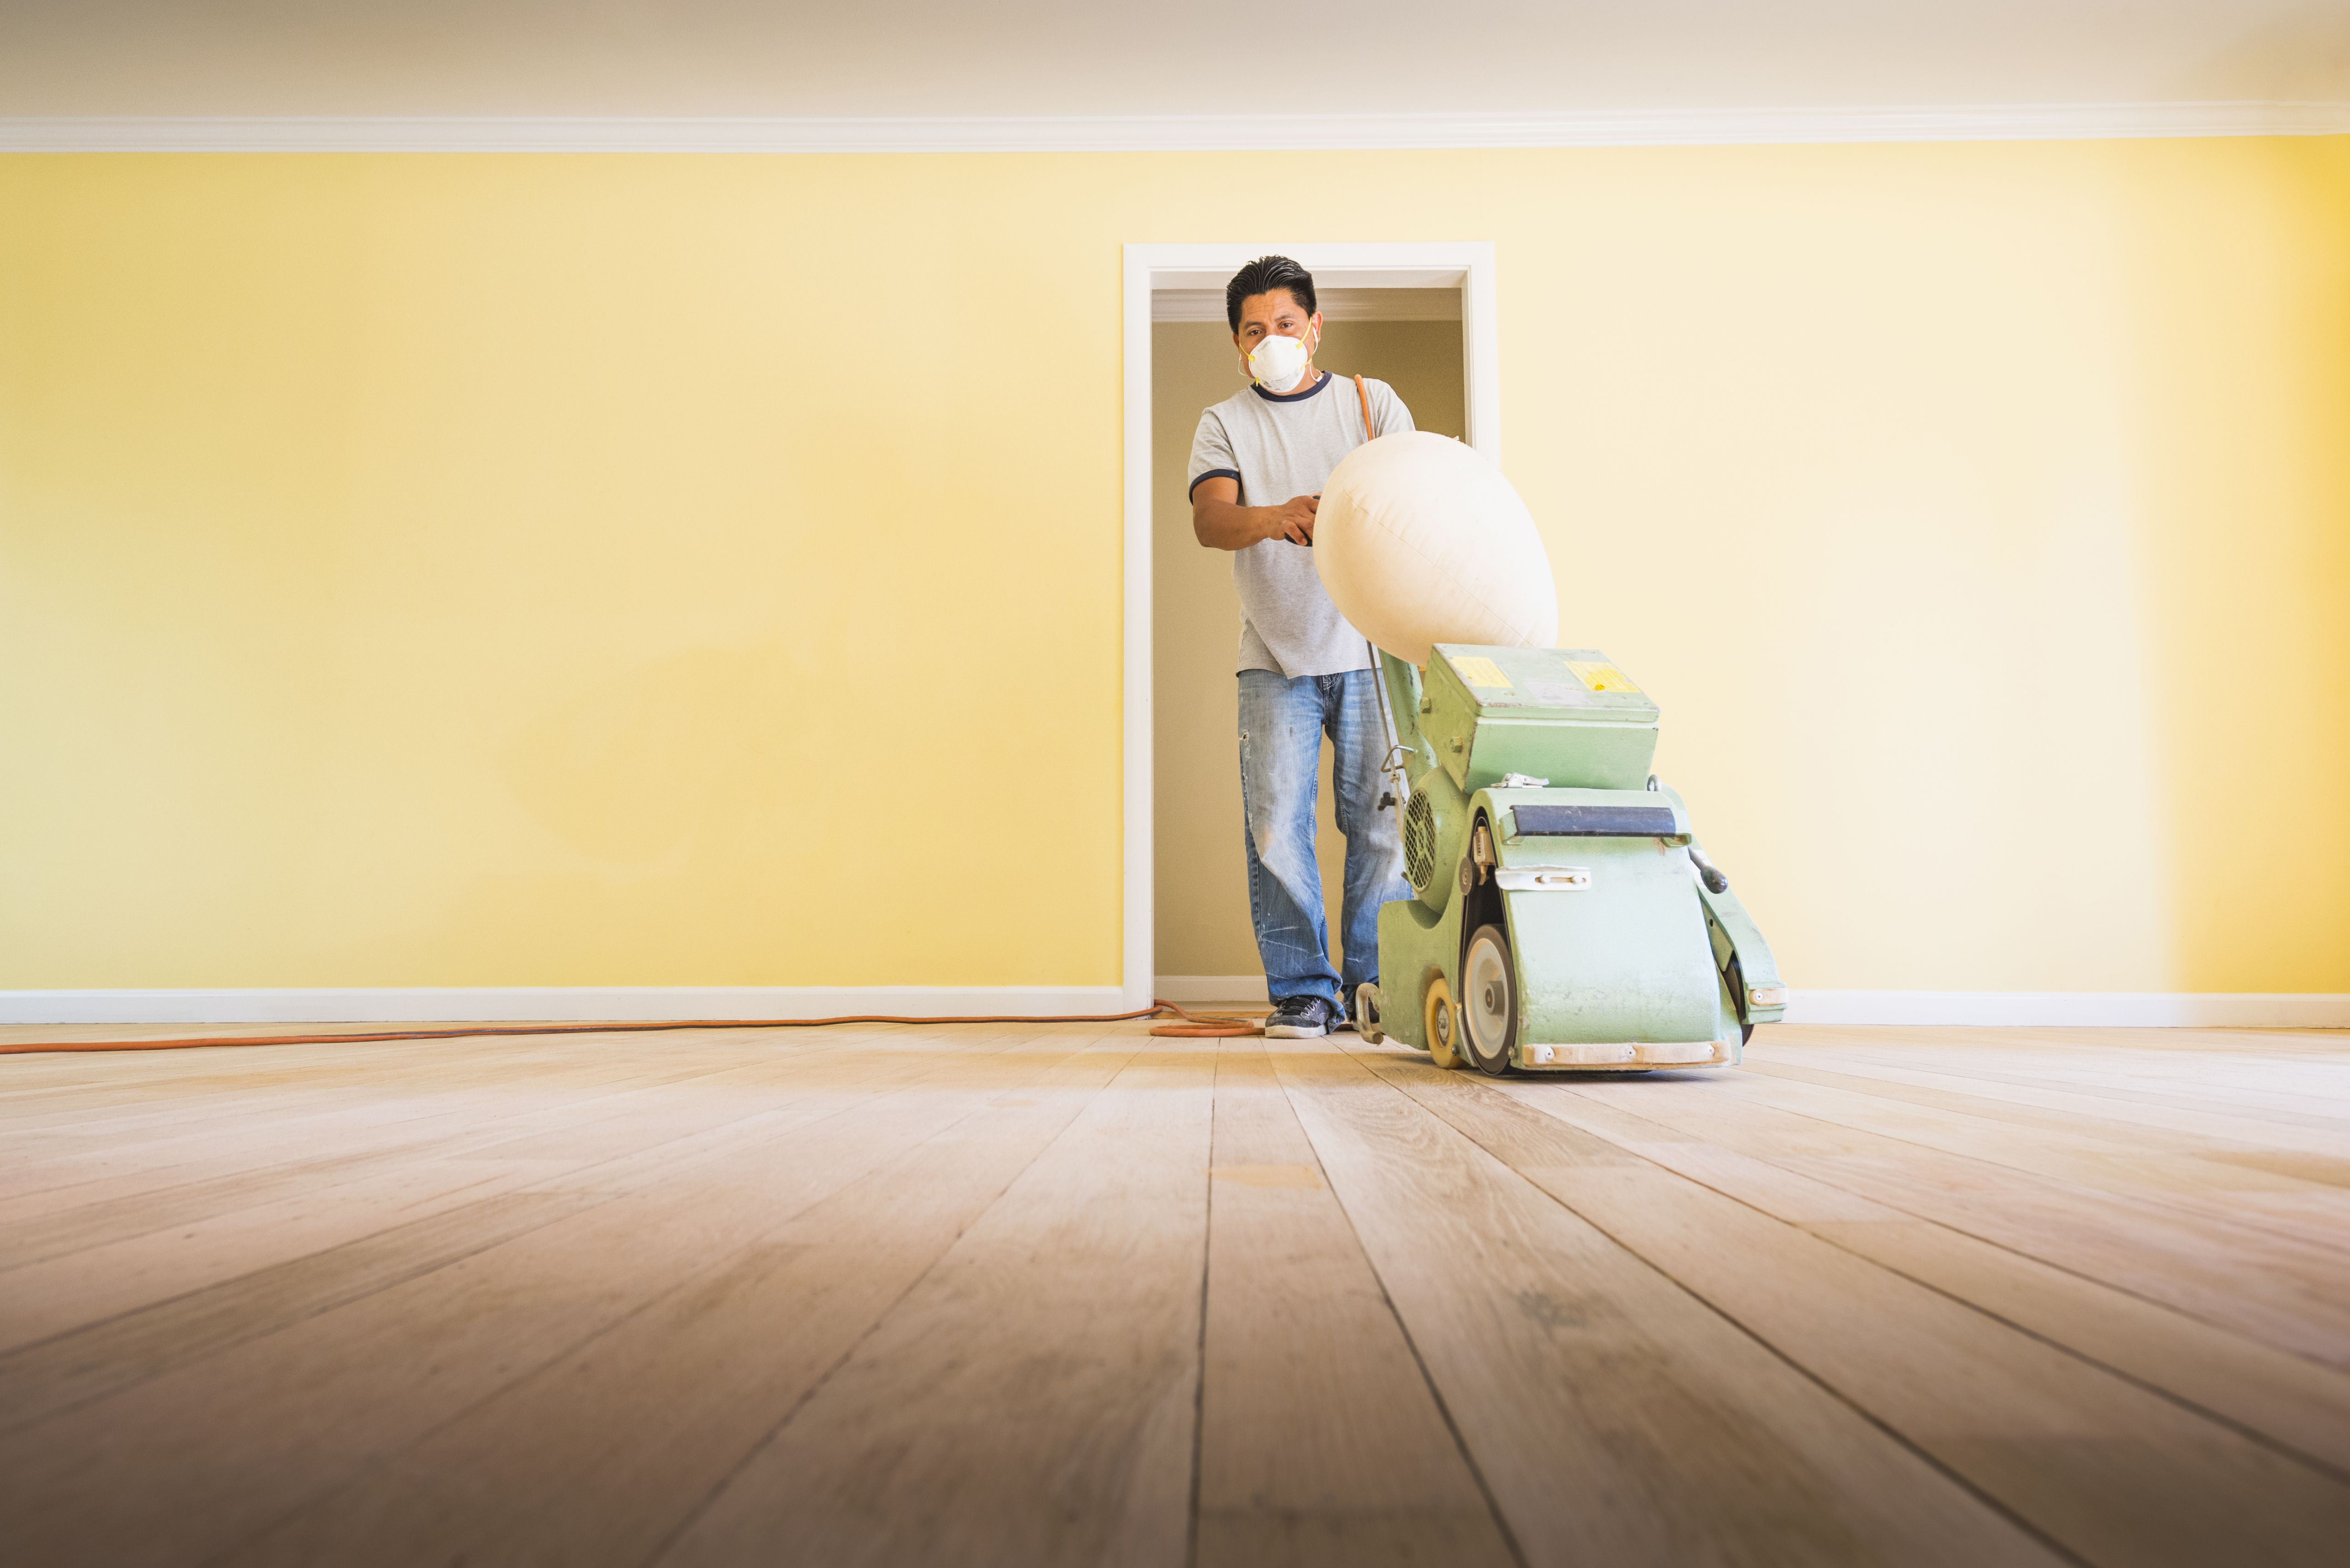 screening hardwood floors cost of should you paint walls or refinish floors first intended for floorsandingafterpainting 5a8f08dfae9ab80037d9d878